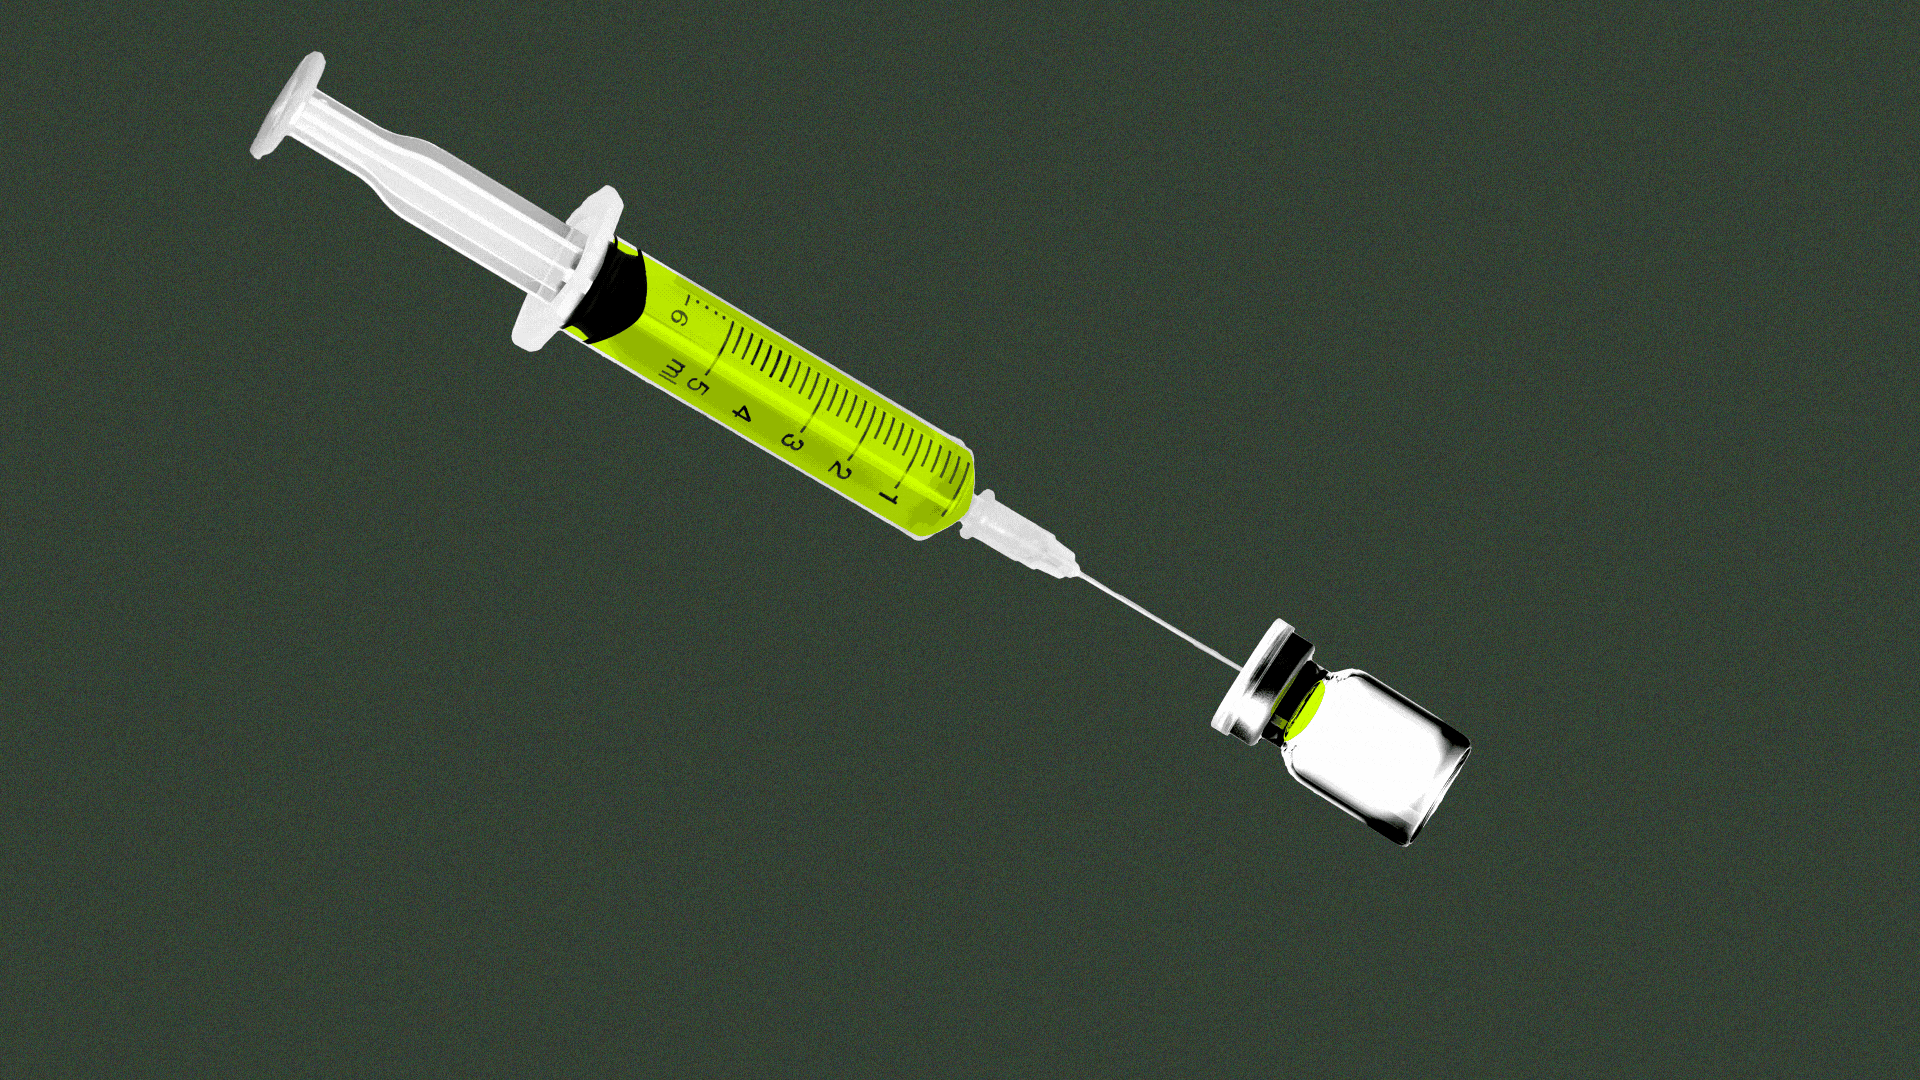 Vaccine syringe and a vial.